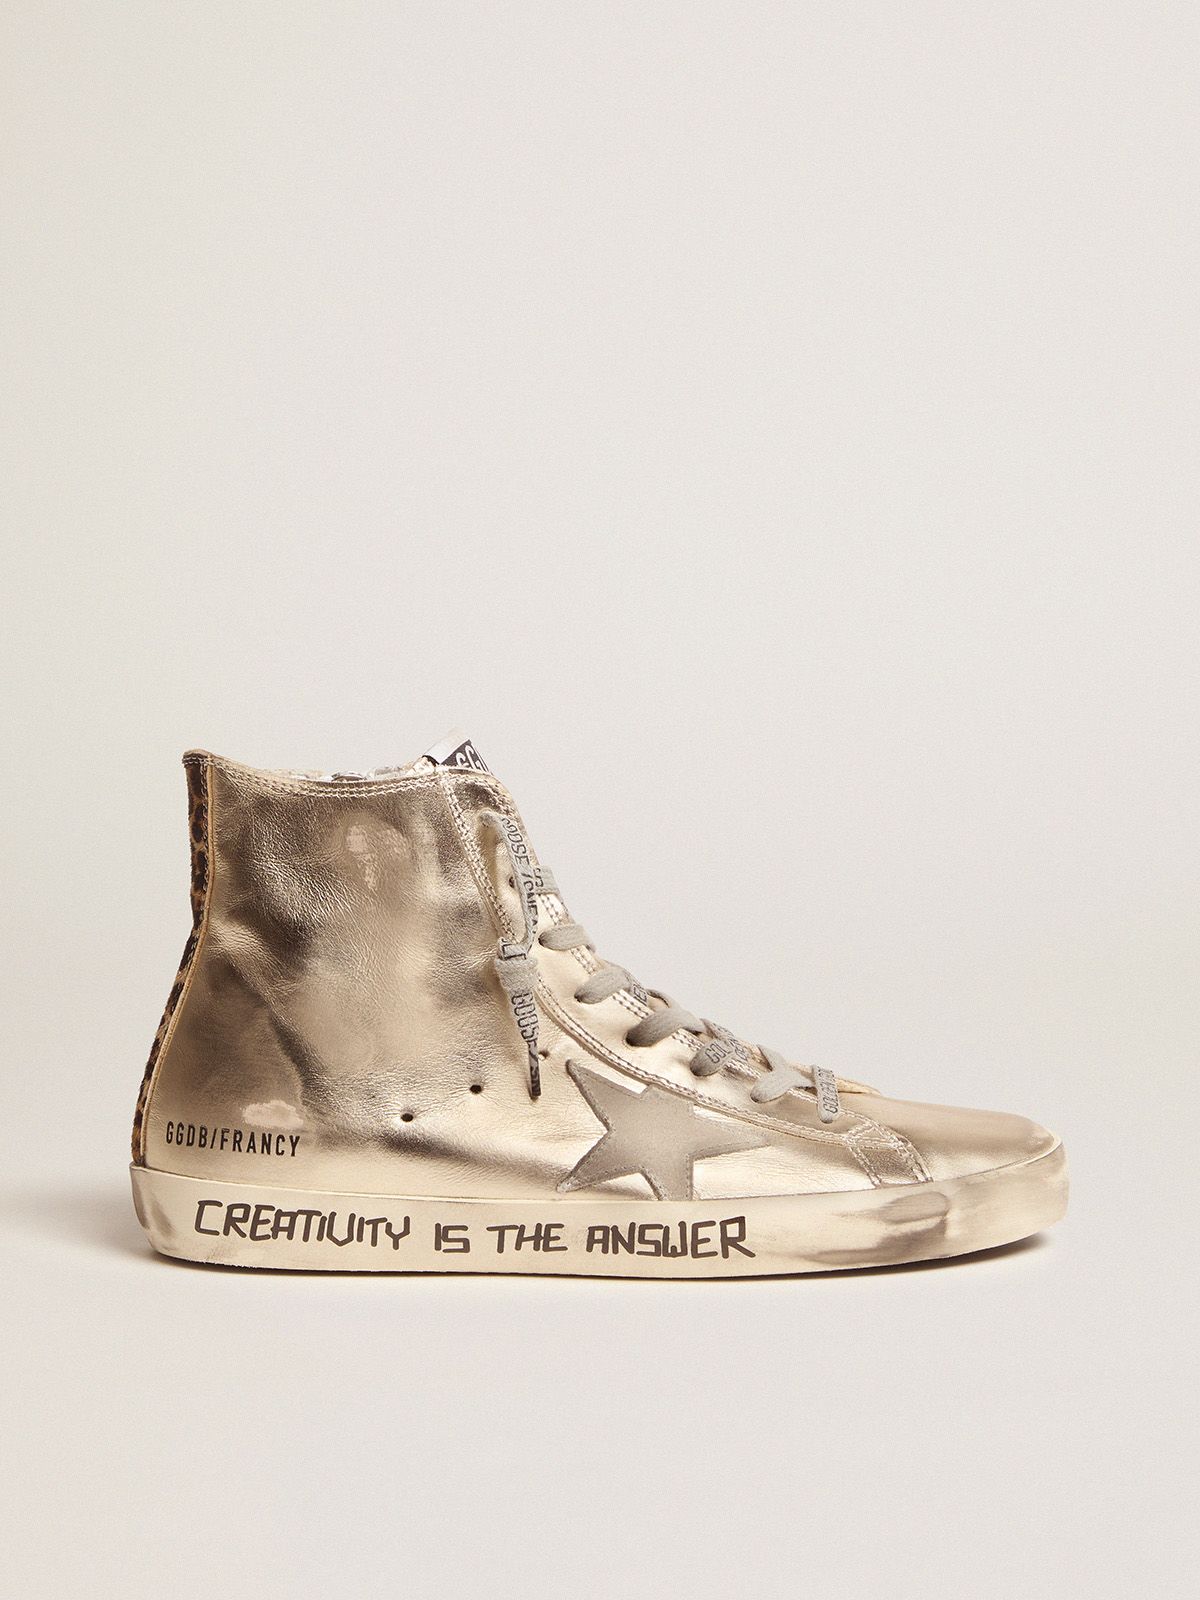 Gold Francy sneakers with handwritten lettering and leopard-print detail